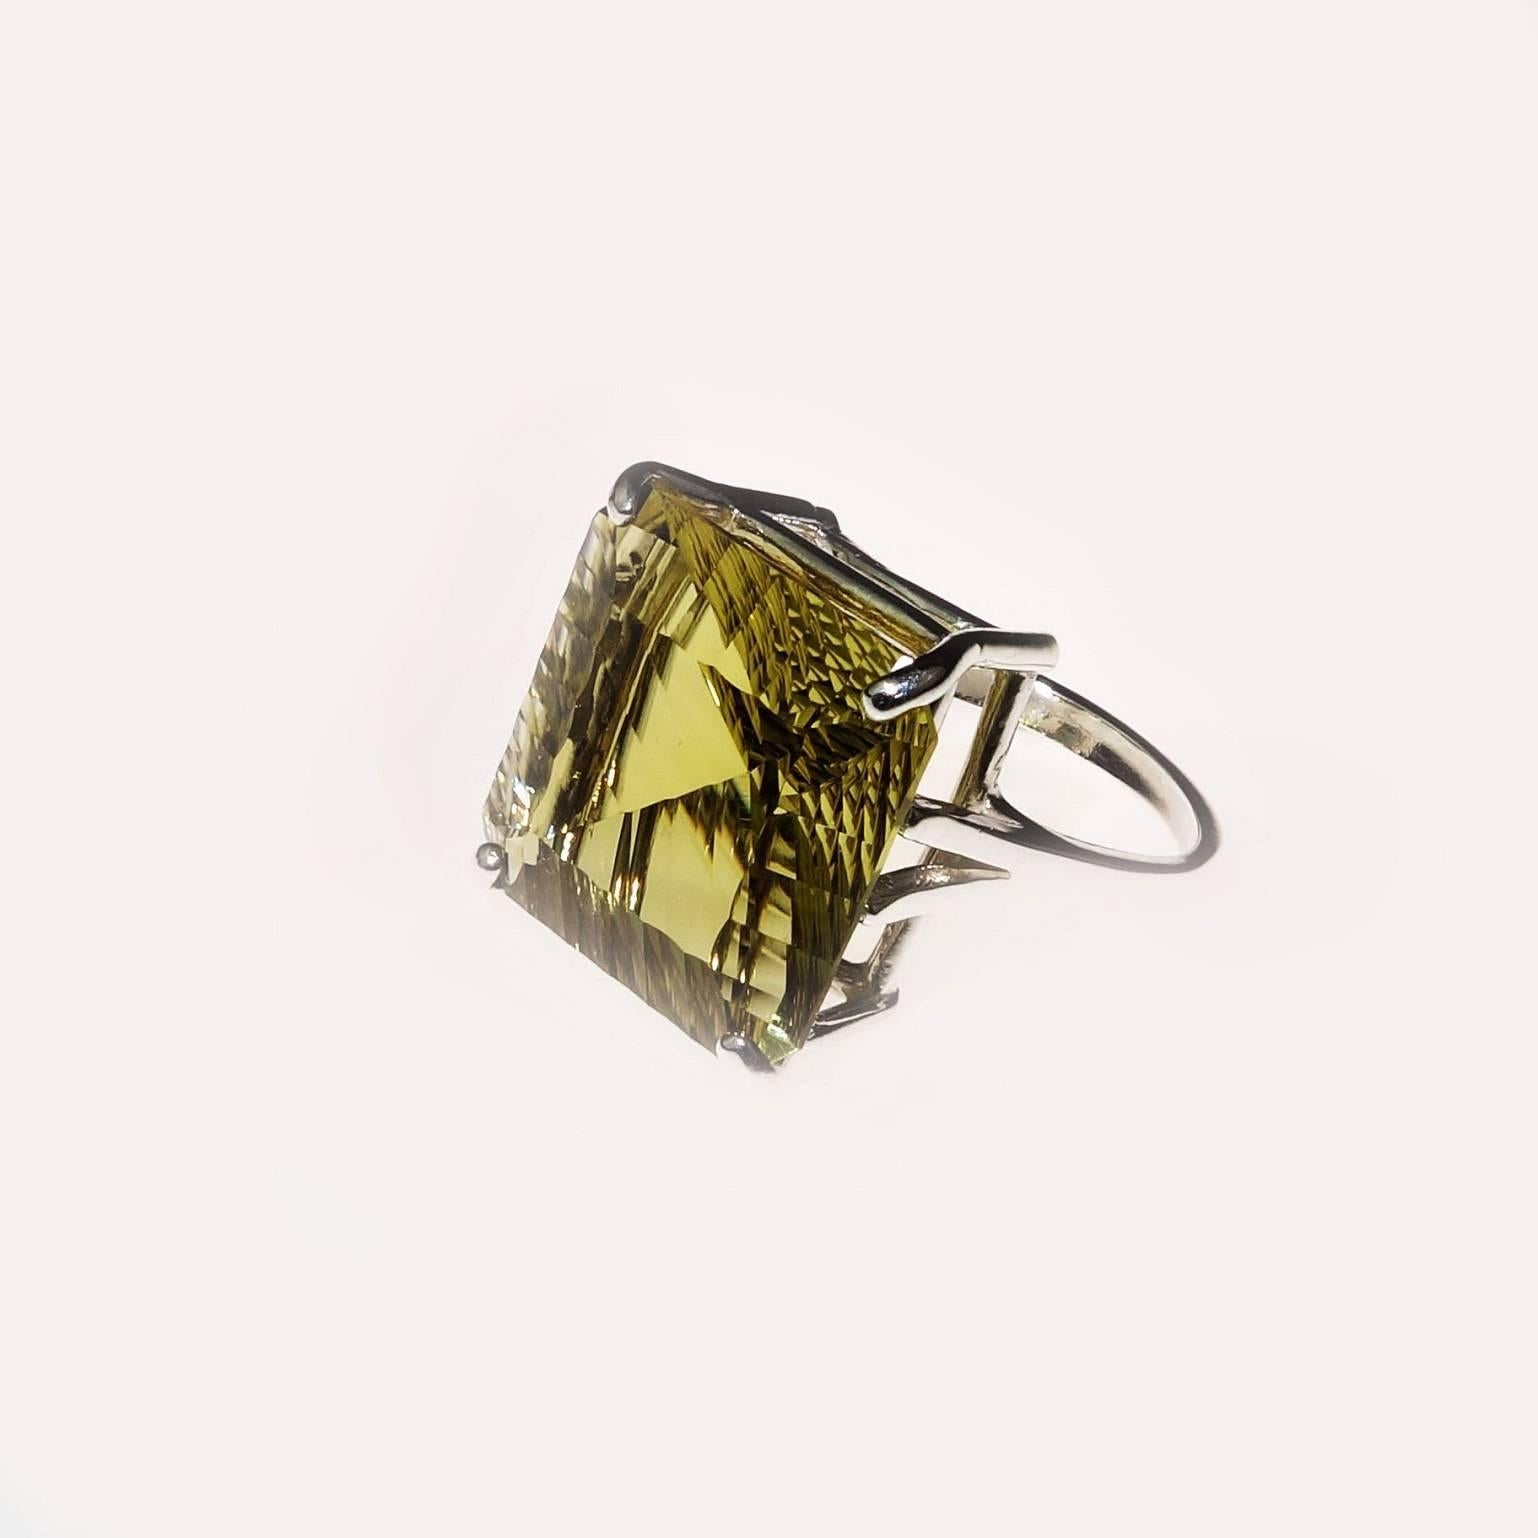 Custom made, large (16x16mm) square Brazilian Fancy Cut Green Gold Quartz & Sterling Silver Ring. I found this gemstone in Ouro Preto, Minas Gerais, Brazil and had to have it. I think it is unique and stunning. I set it with a simple setting so that